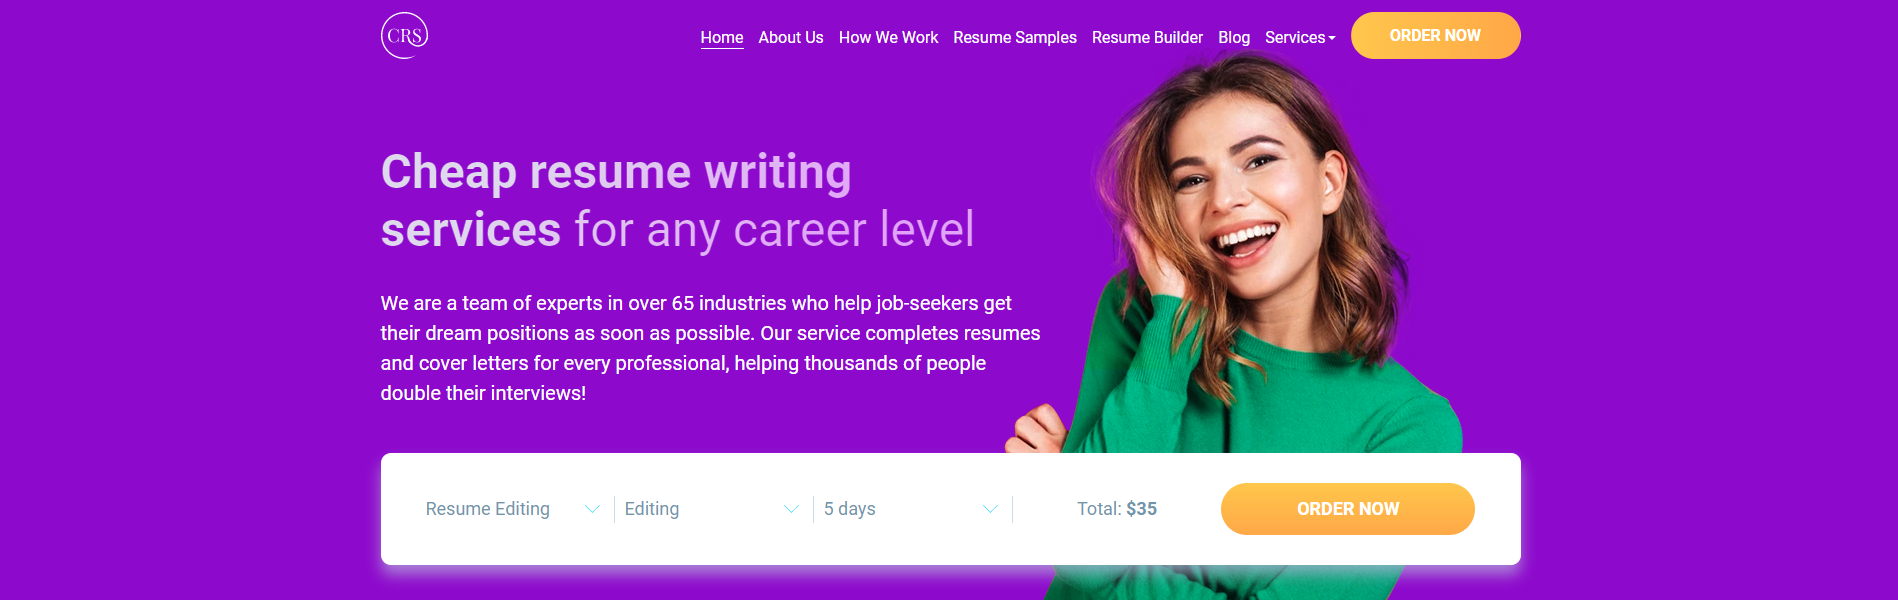 Cheap Resume Services Hero Section Best Engineering Resume Writing Services